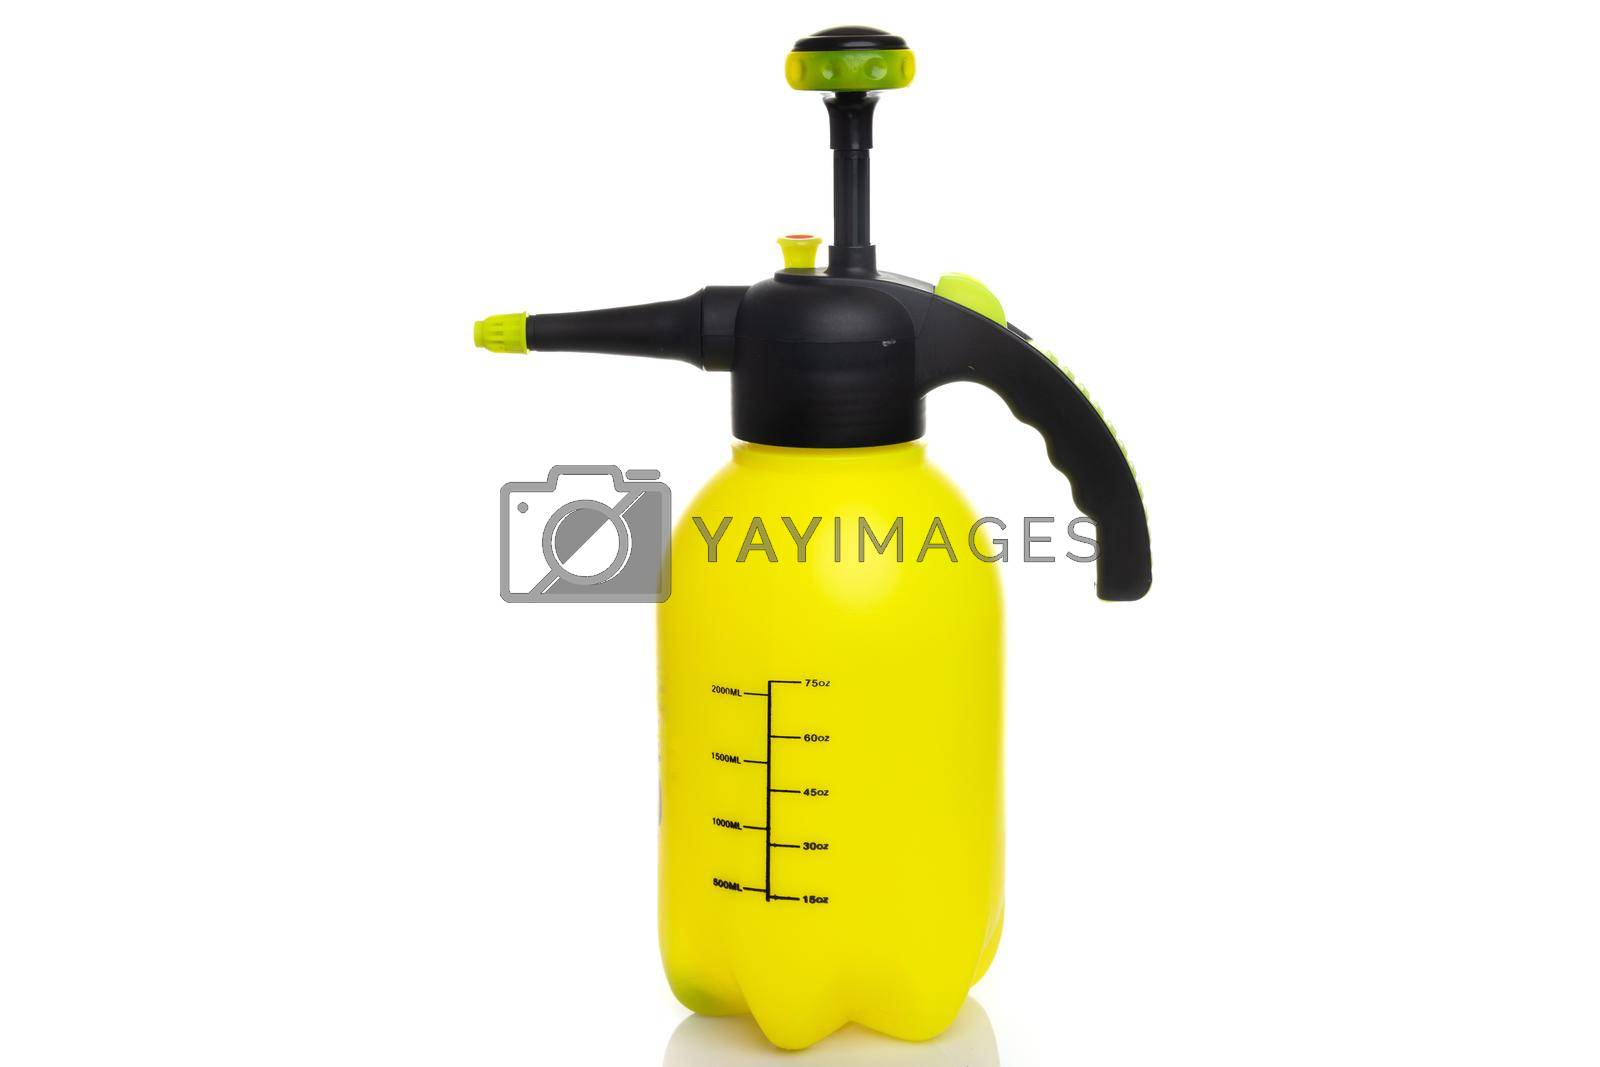 Royalty free image of yellow garden sprayer on white isolated background by TRMK